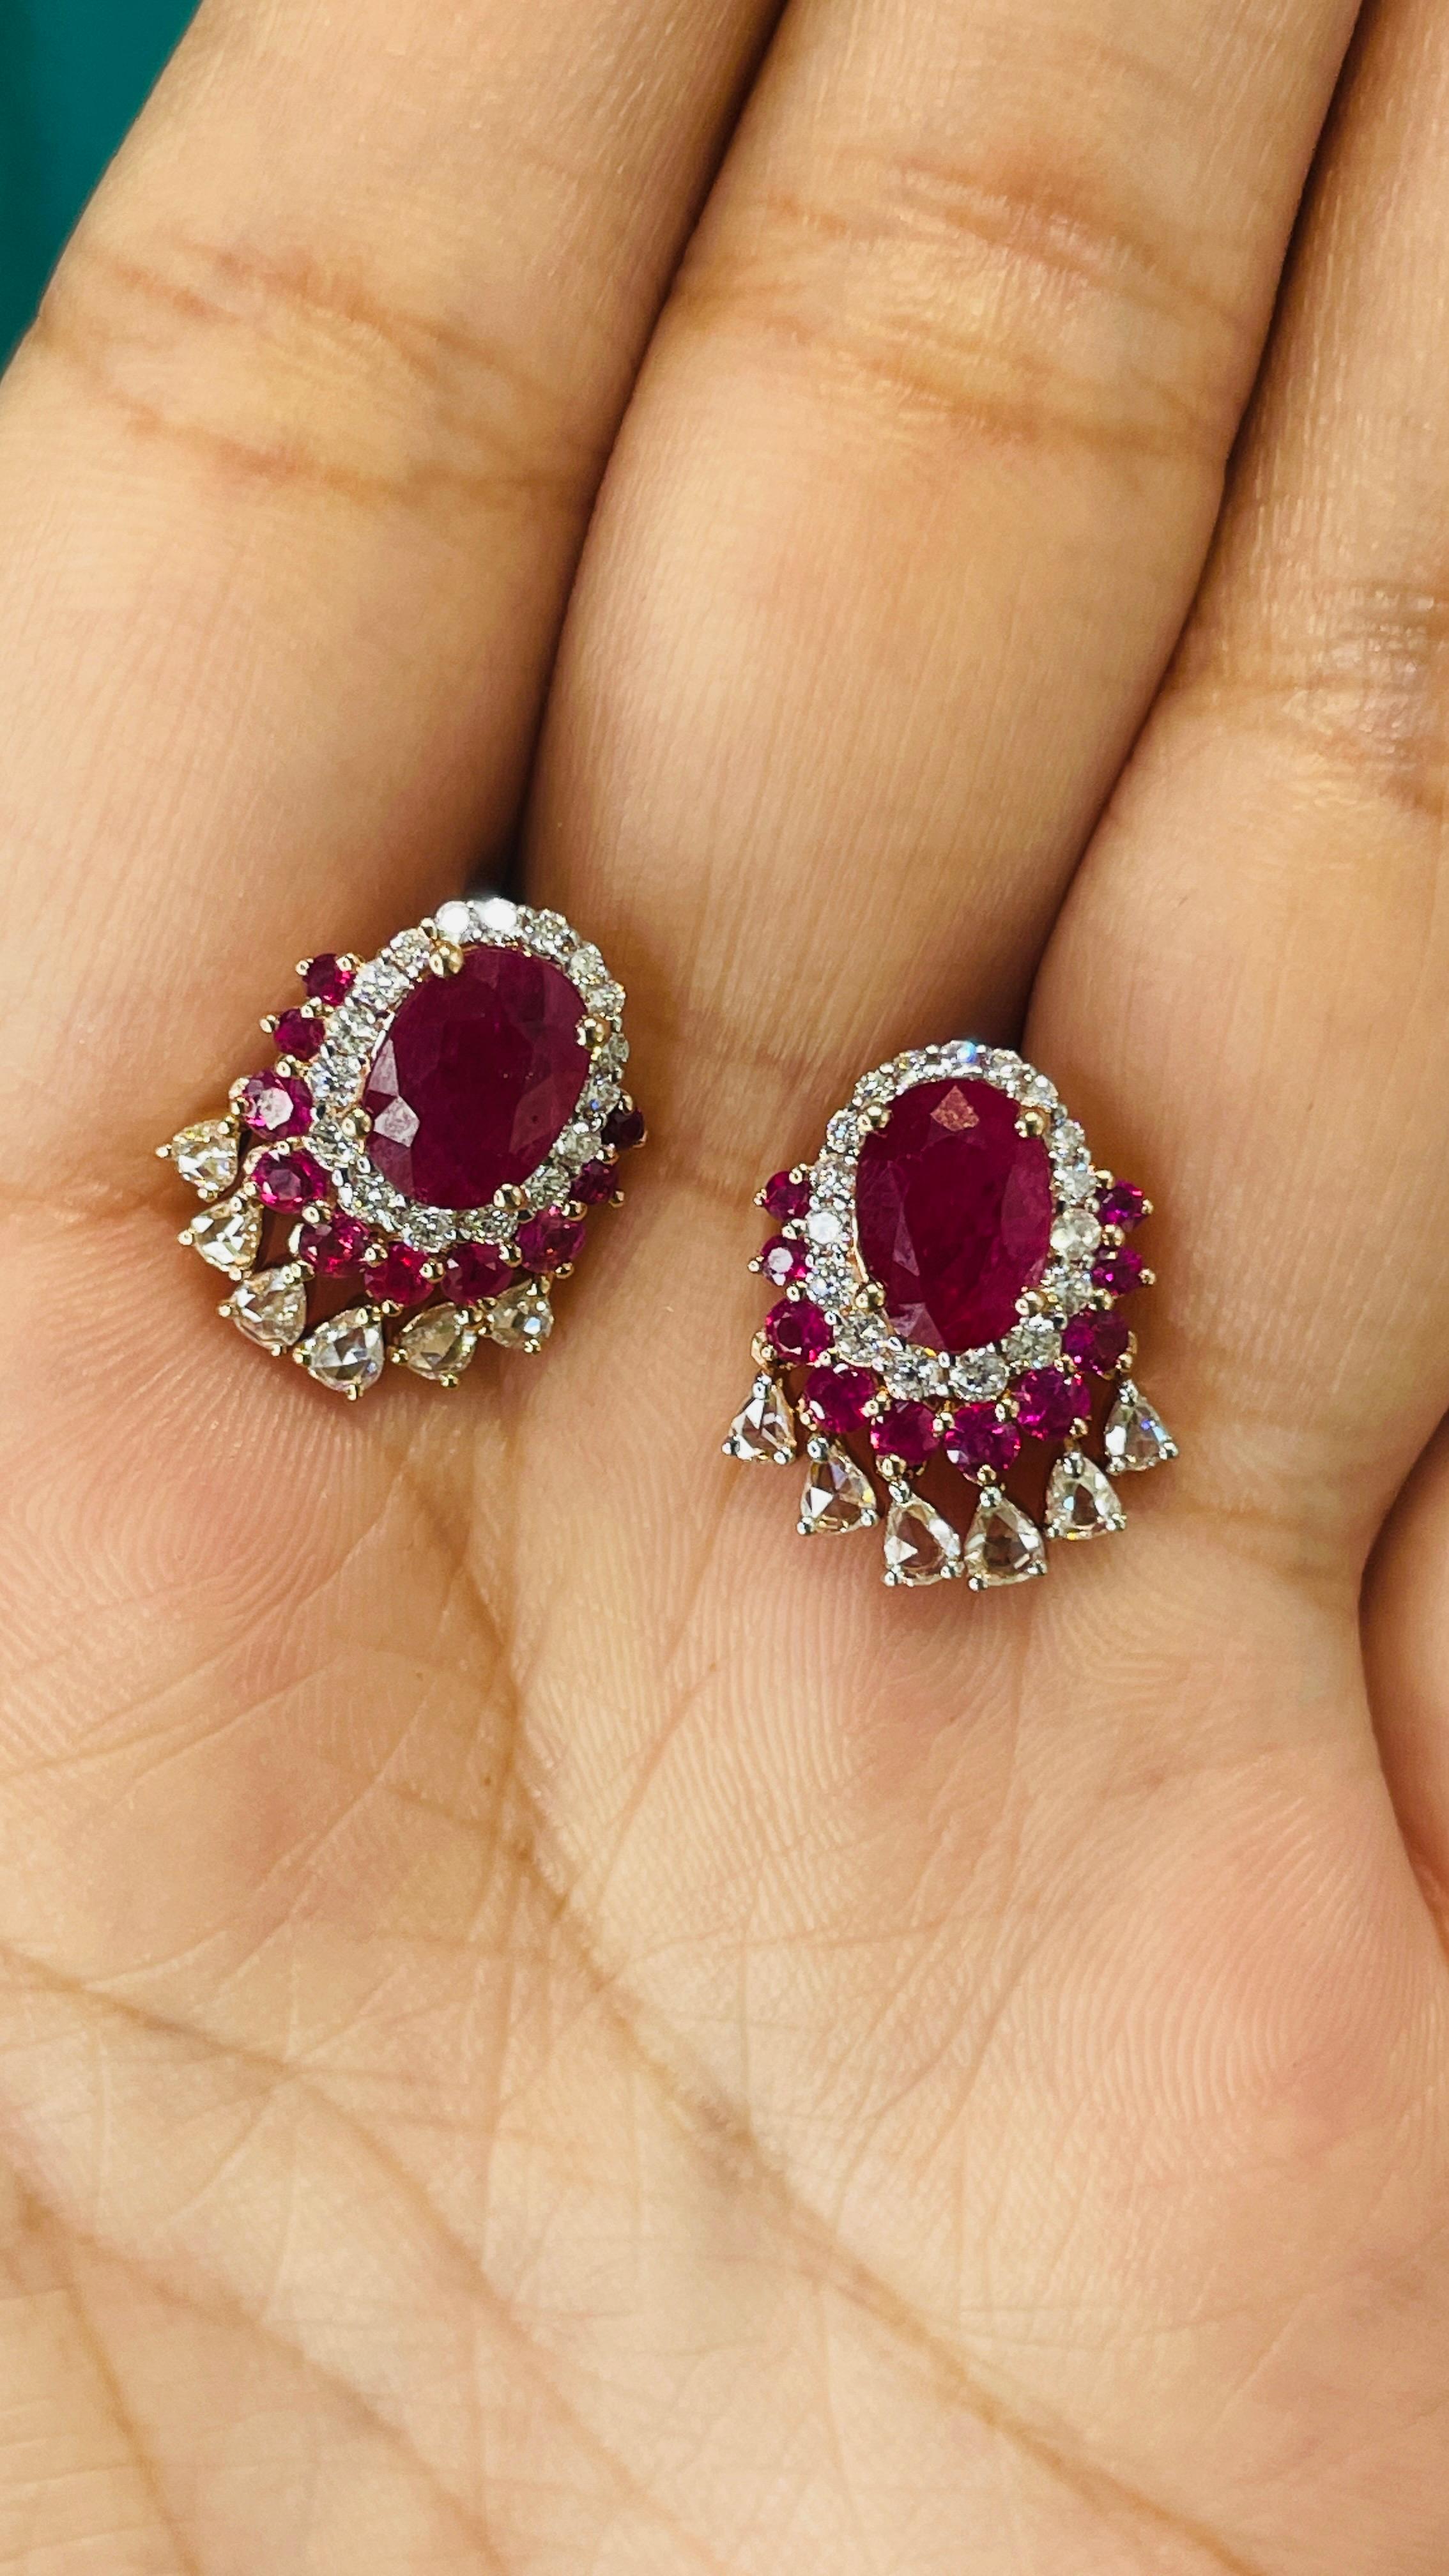 Earrings create a subtle beauty while showcasing the colors of the natural precious gemstones and illuminating diamonds making a statement. These are the great bridesmaid, wedding or christmas gift for anyone on your list.

Oval cut ruby and diamond